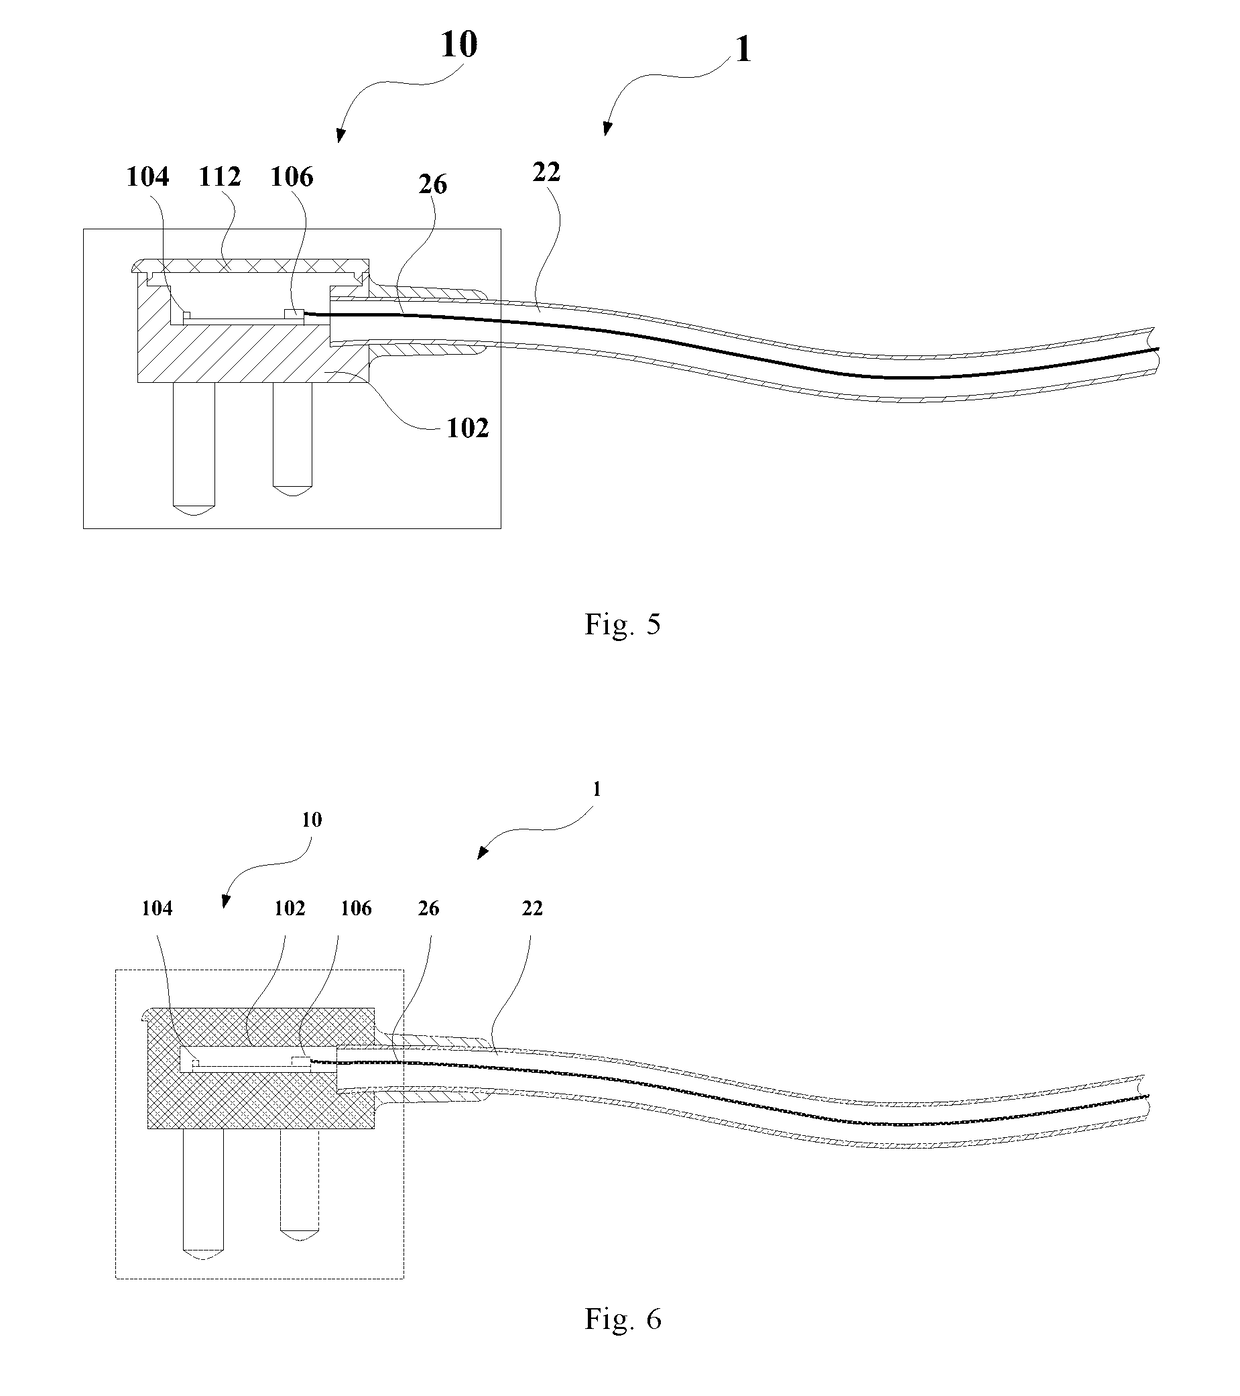 Power cord plug, cable, power cord structure and electrical device